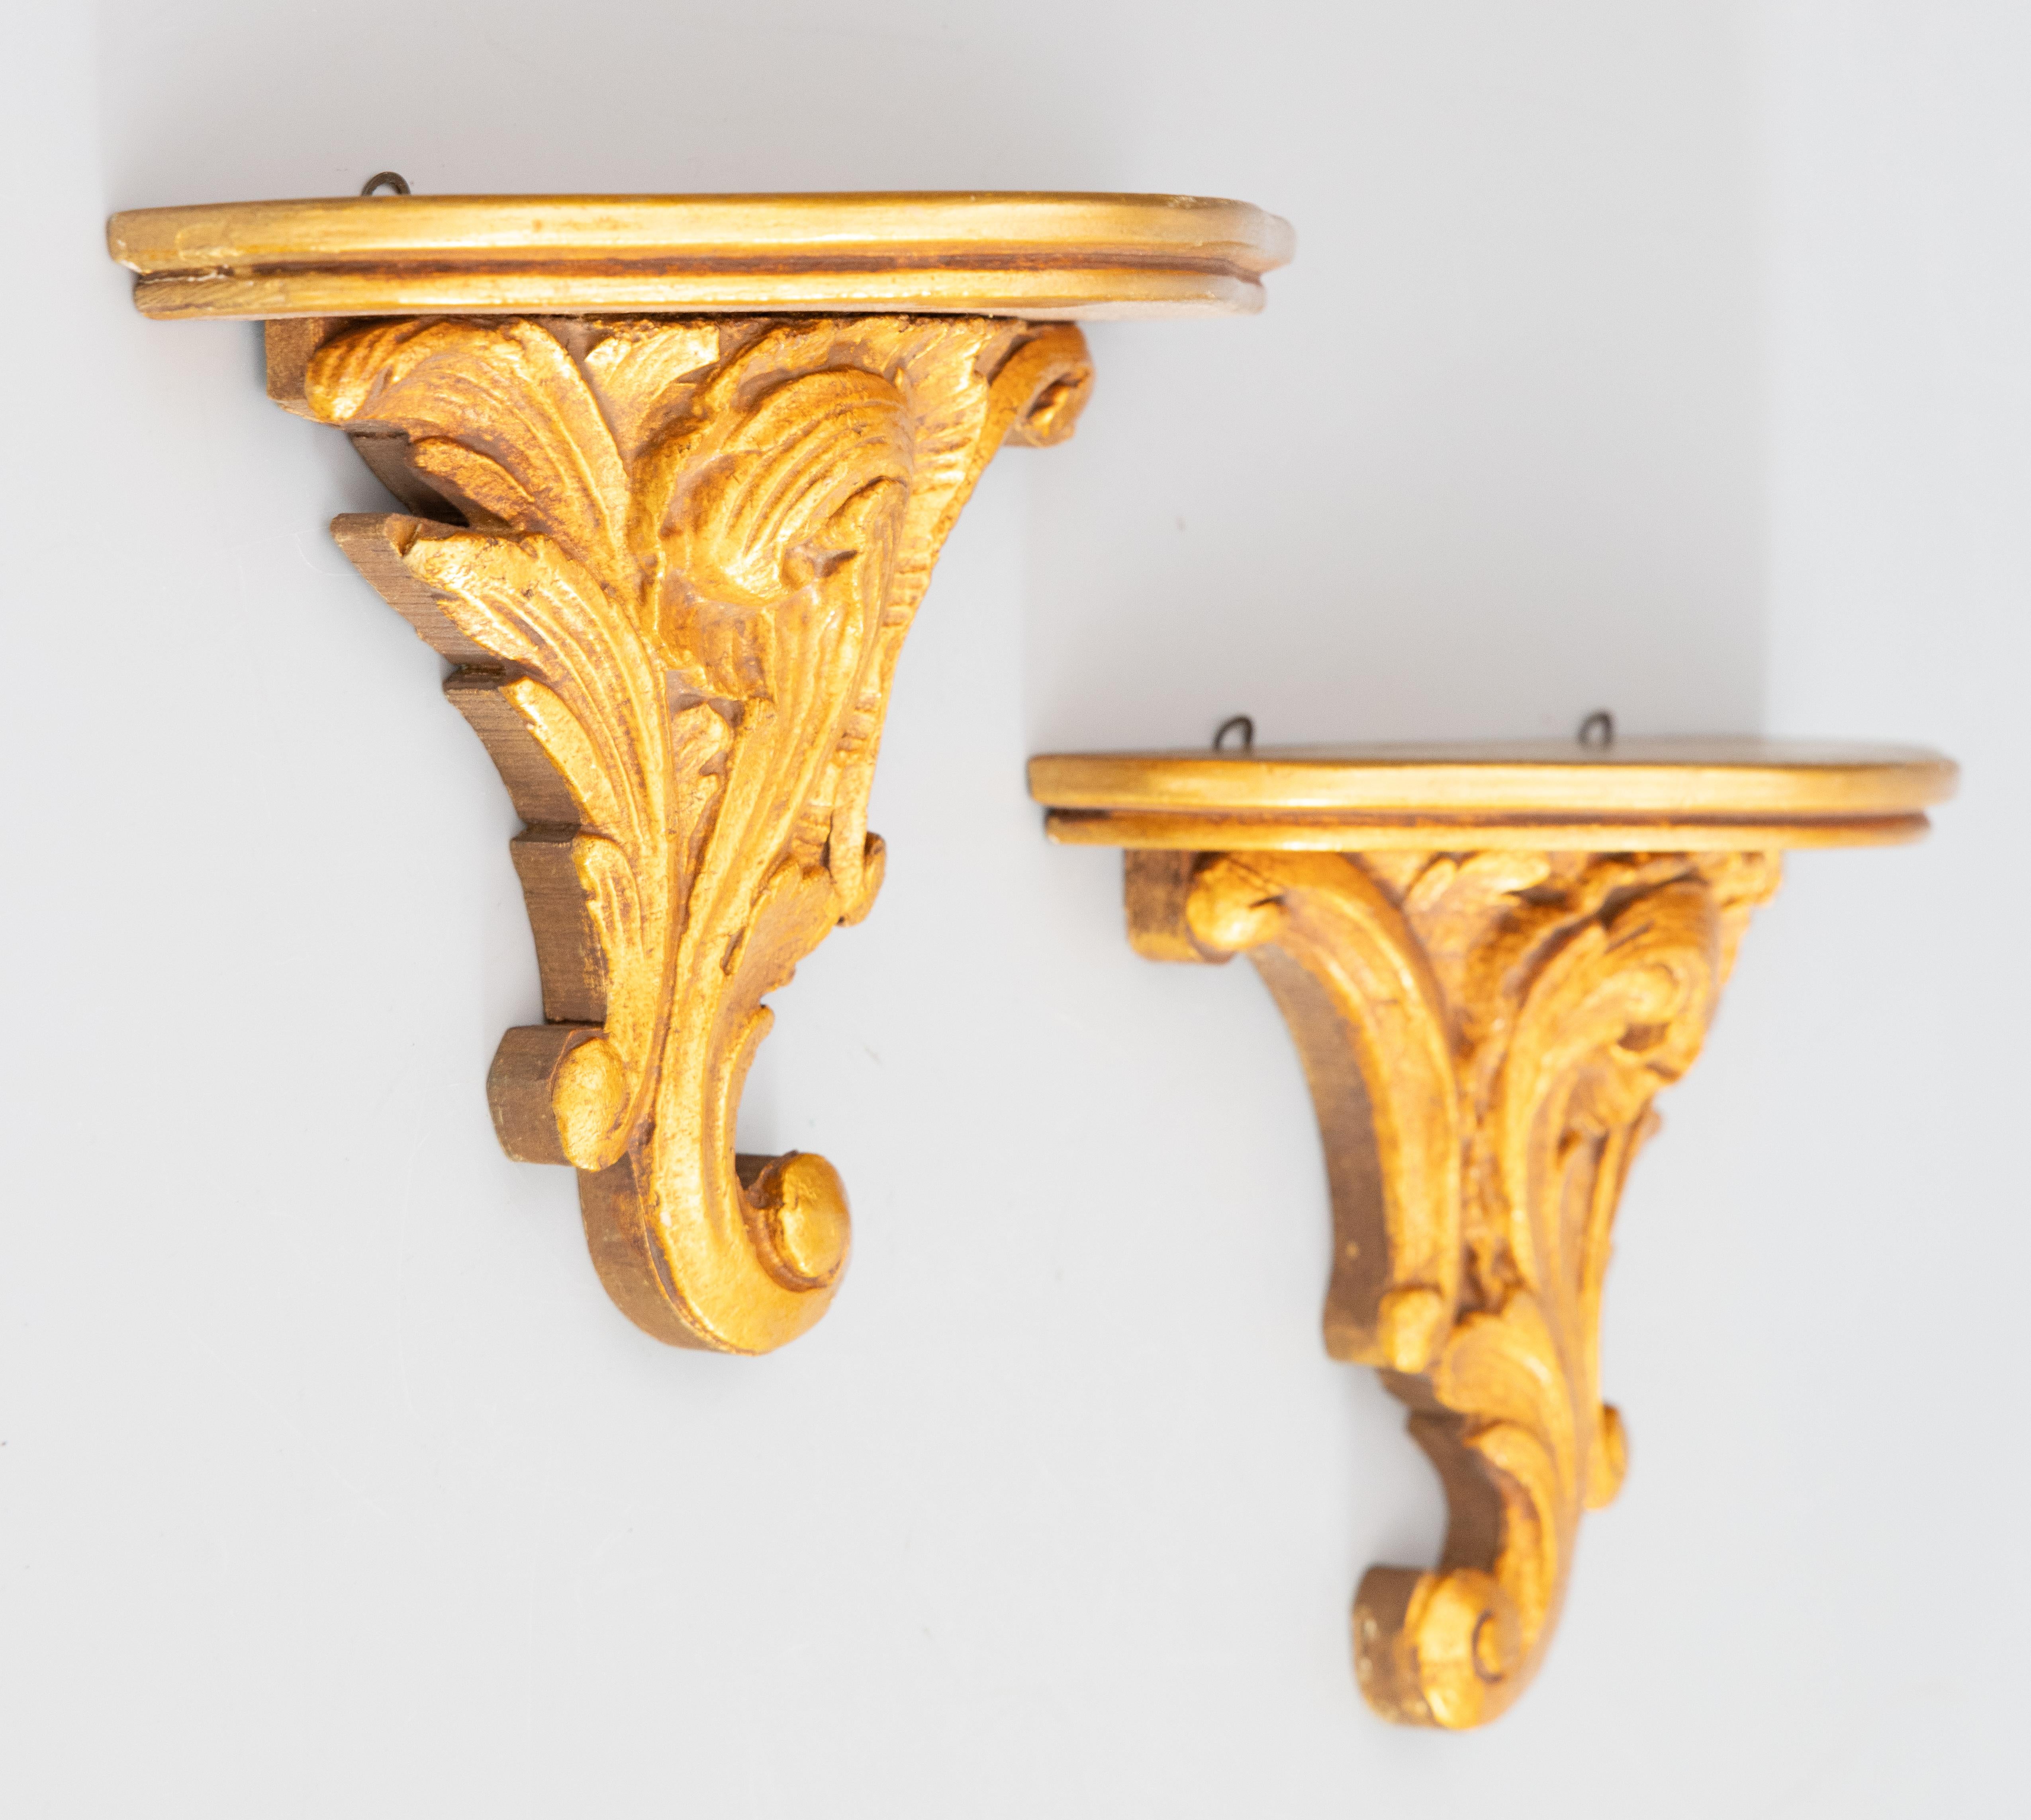 A lovely pair of vintage Italian gilded wood and gesso wall brackets shelves, circa 1950. These stunning brackets are decorated with scrolling leaves in a beautiful gilt patina. They are perfect for displaying decorative collectibles or fabulous on